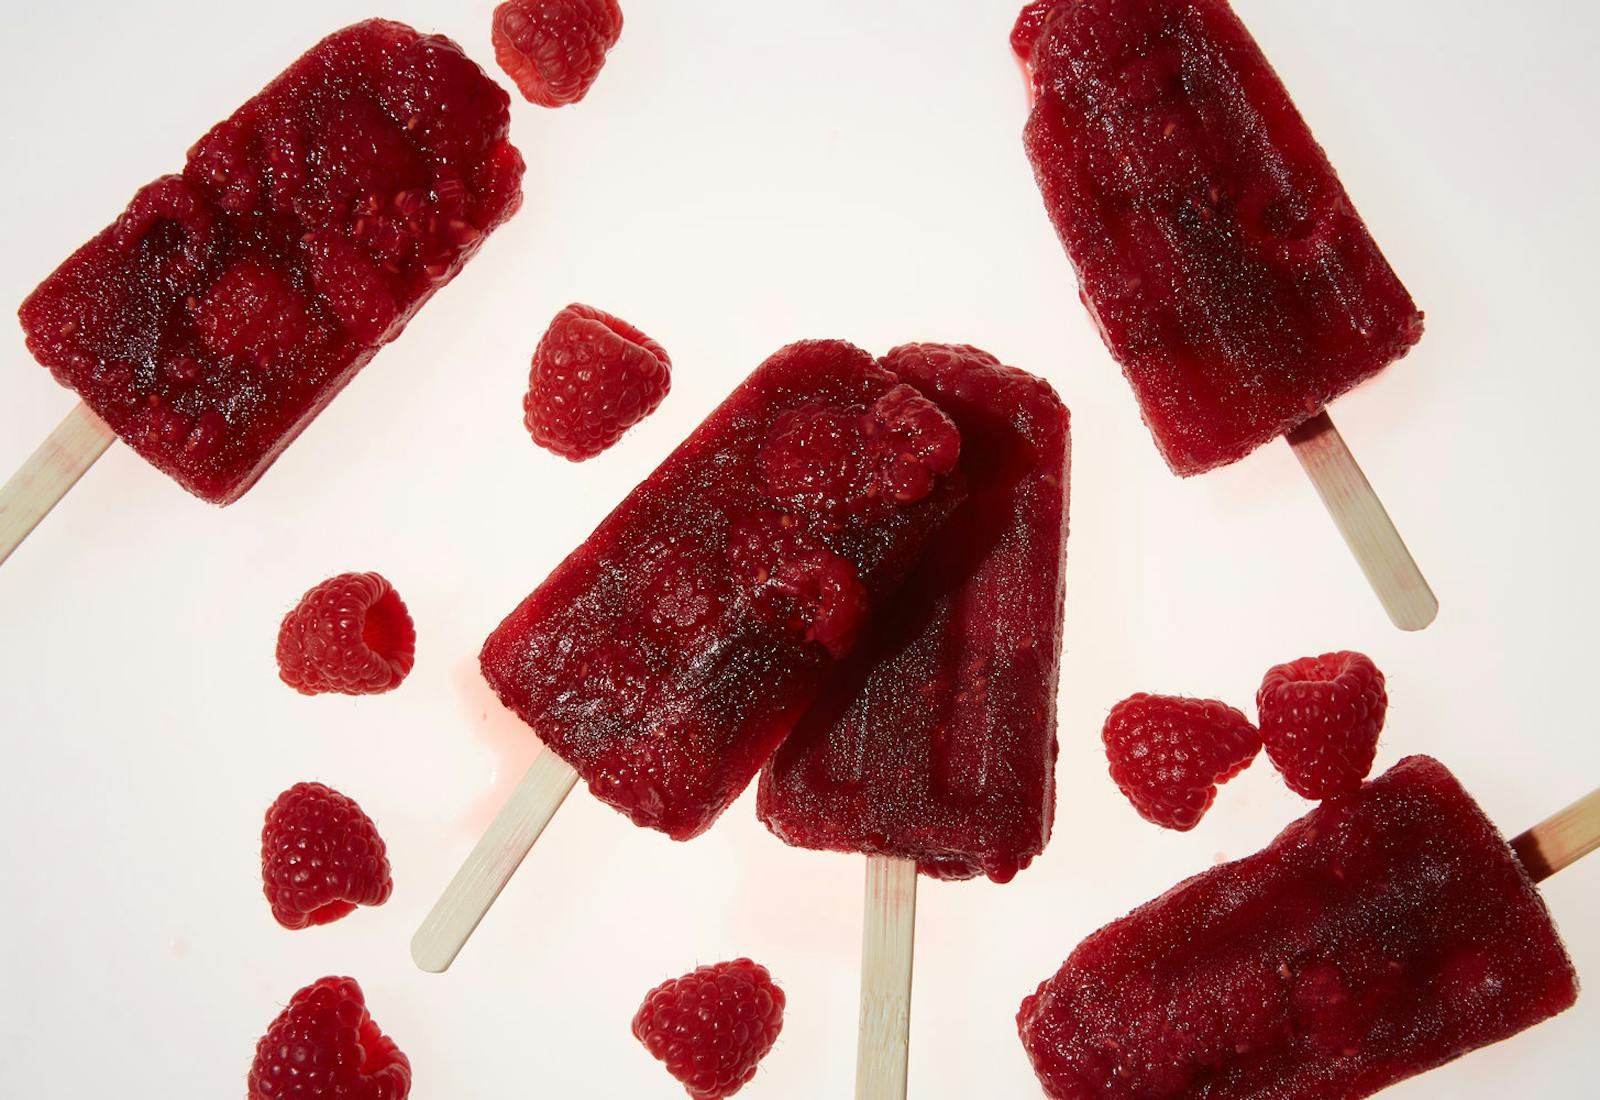 Raspberry ice pops with scattered fresh raspberries on white surface.